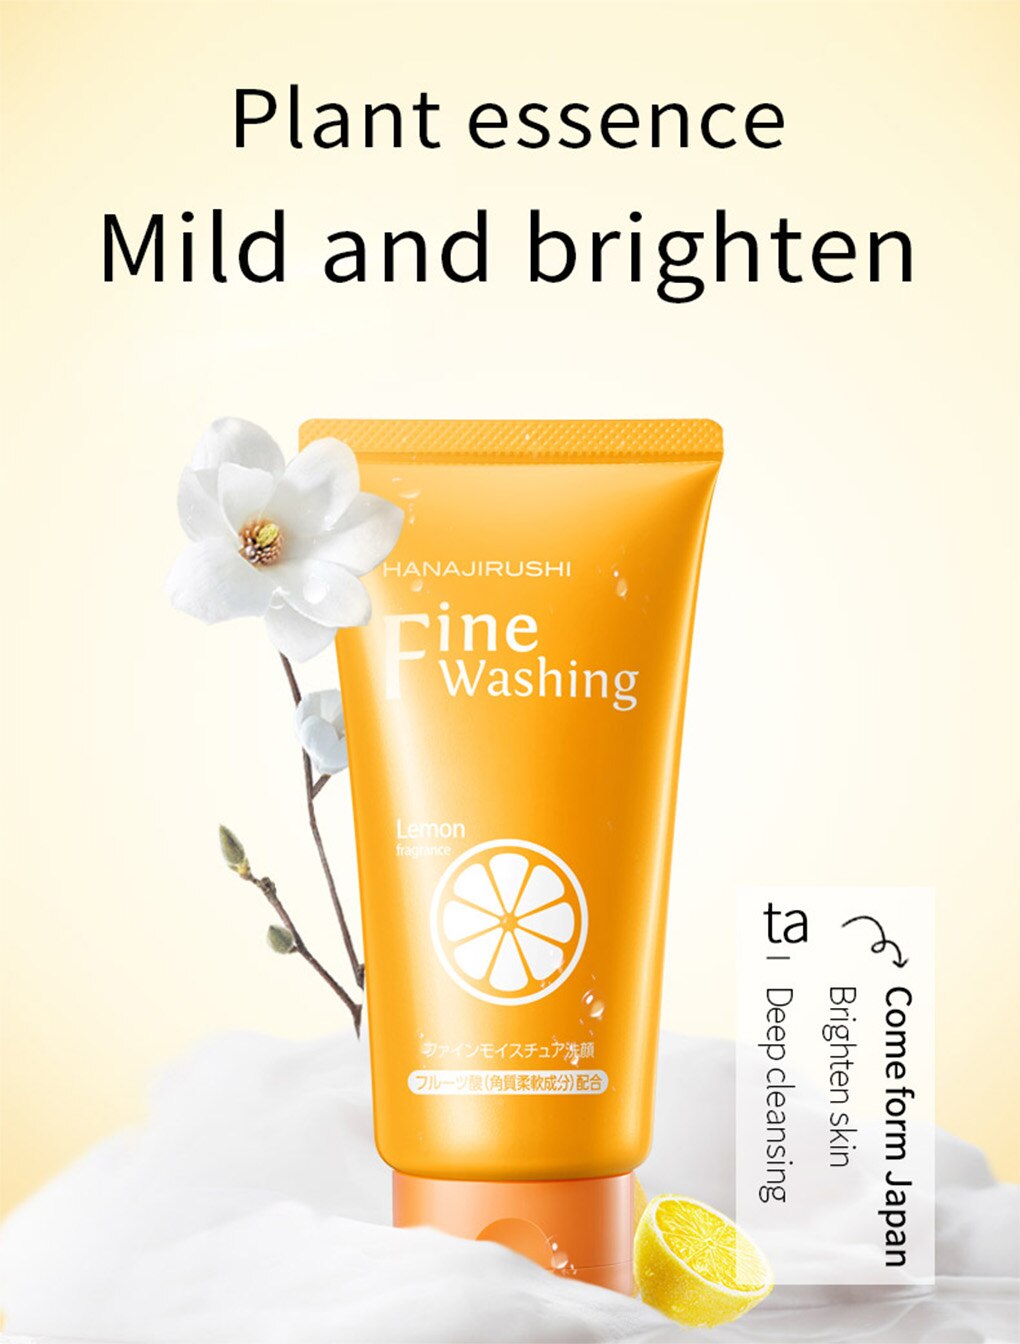 Vitamin C Face and Body Cleanser for Skin Care